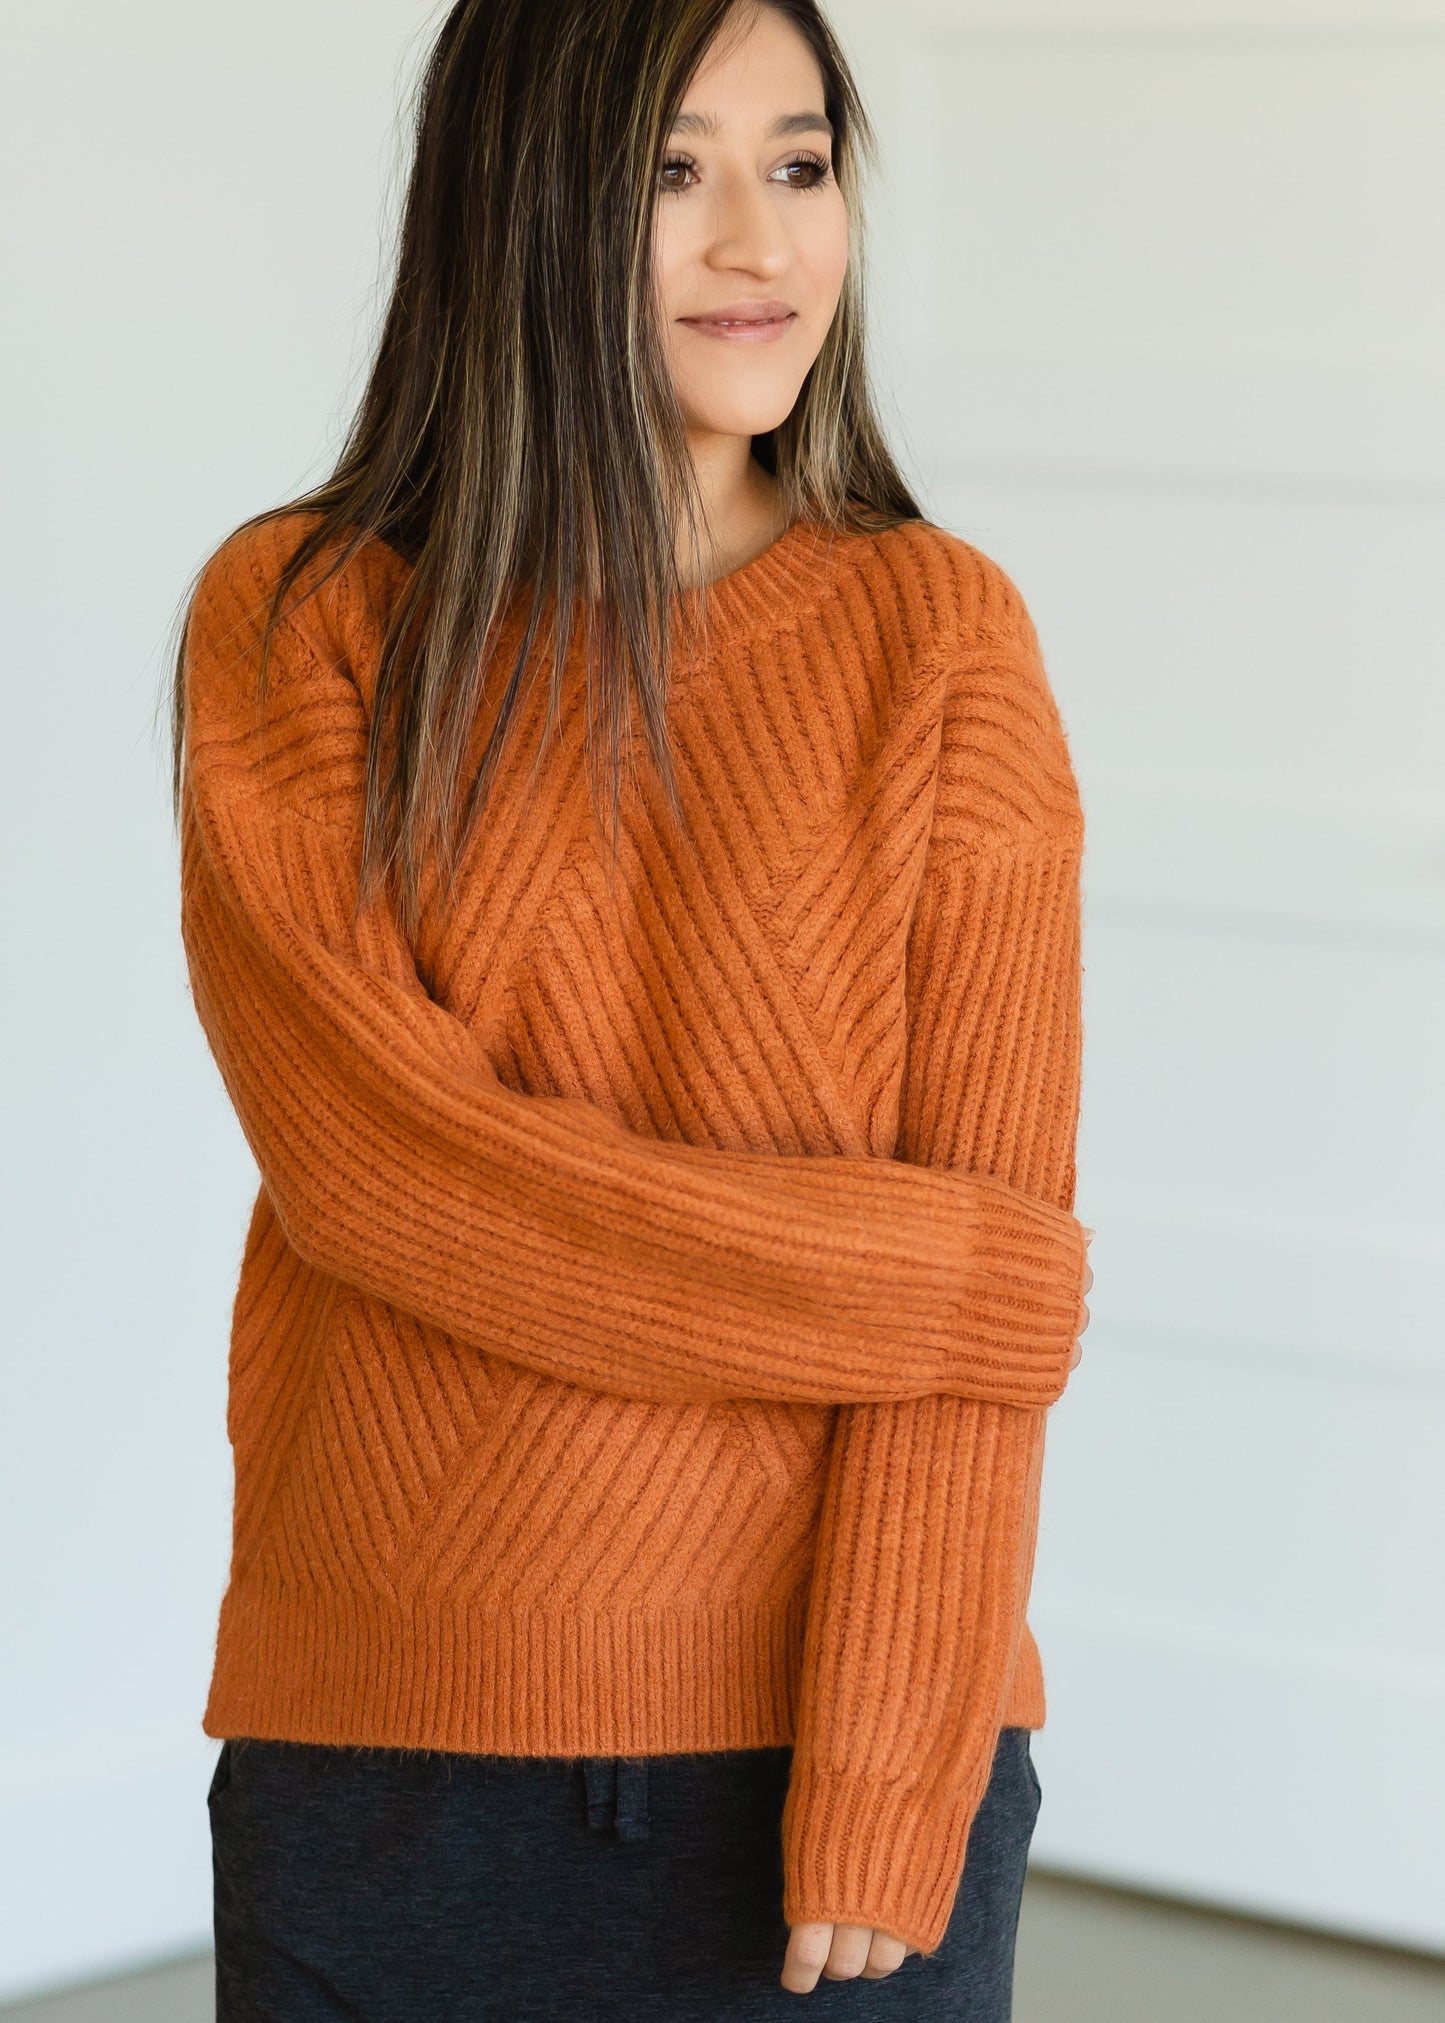 Bonnie Toffee Woven Sweater - FINAL SALE Tops